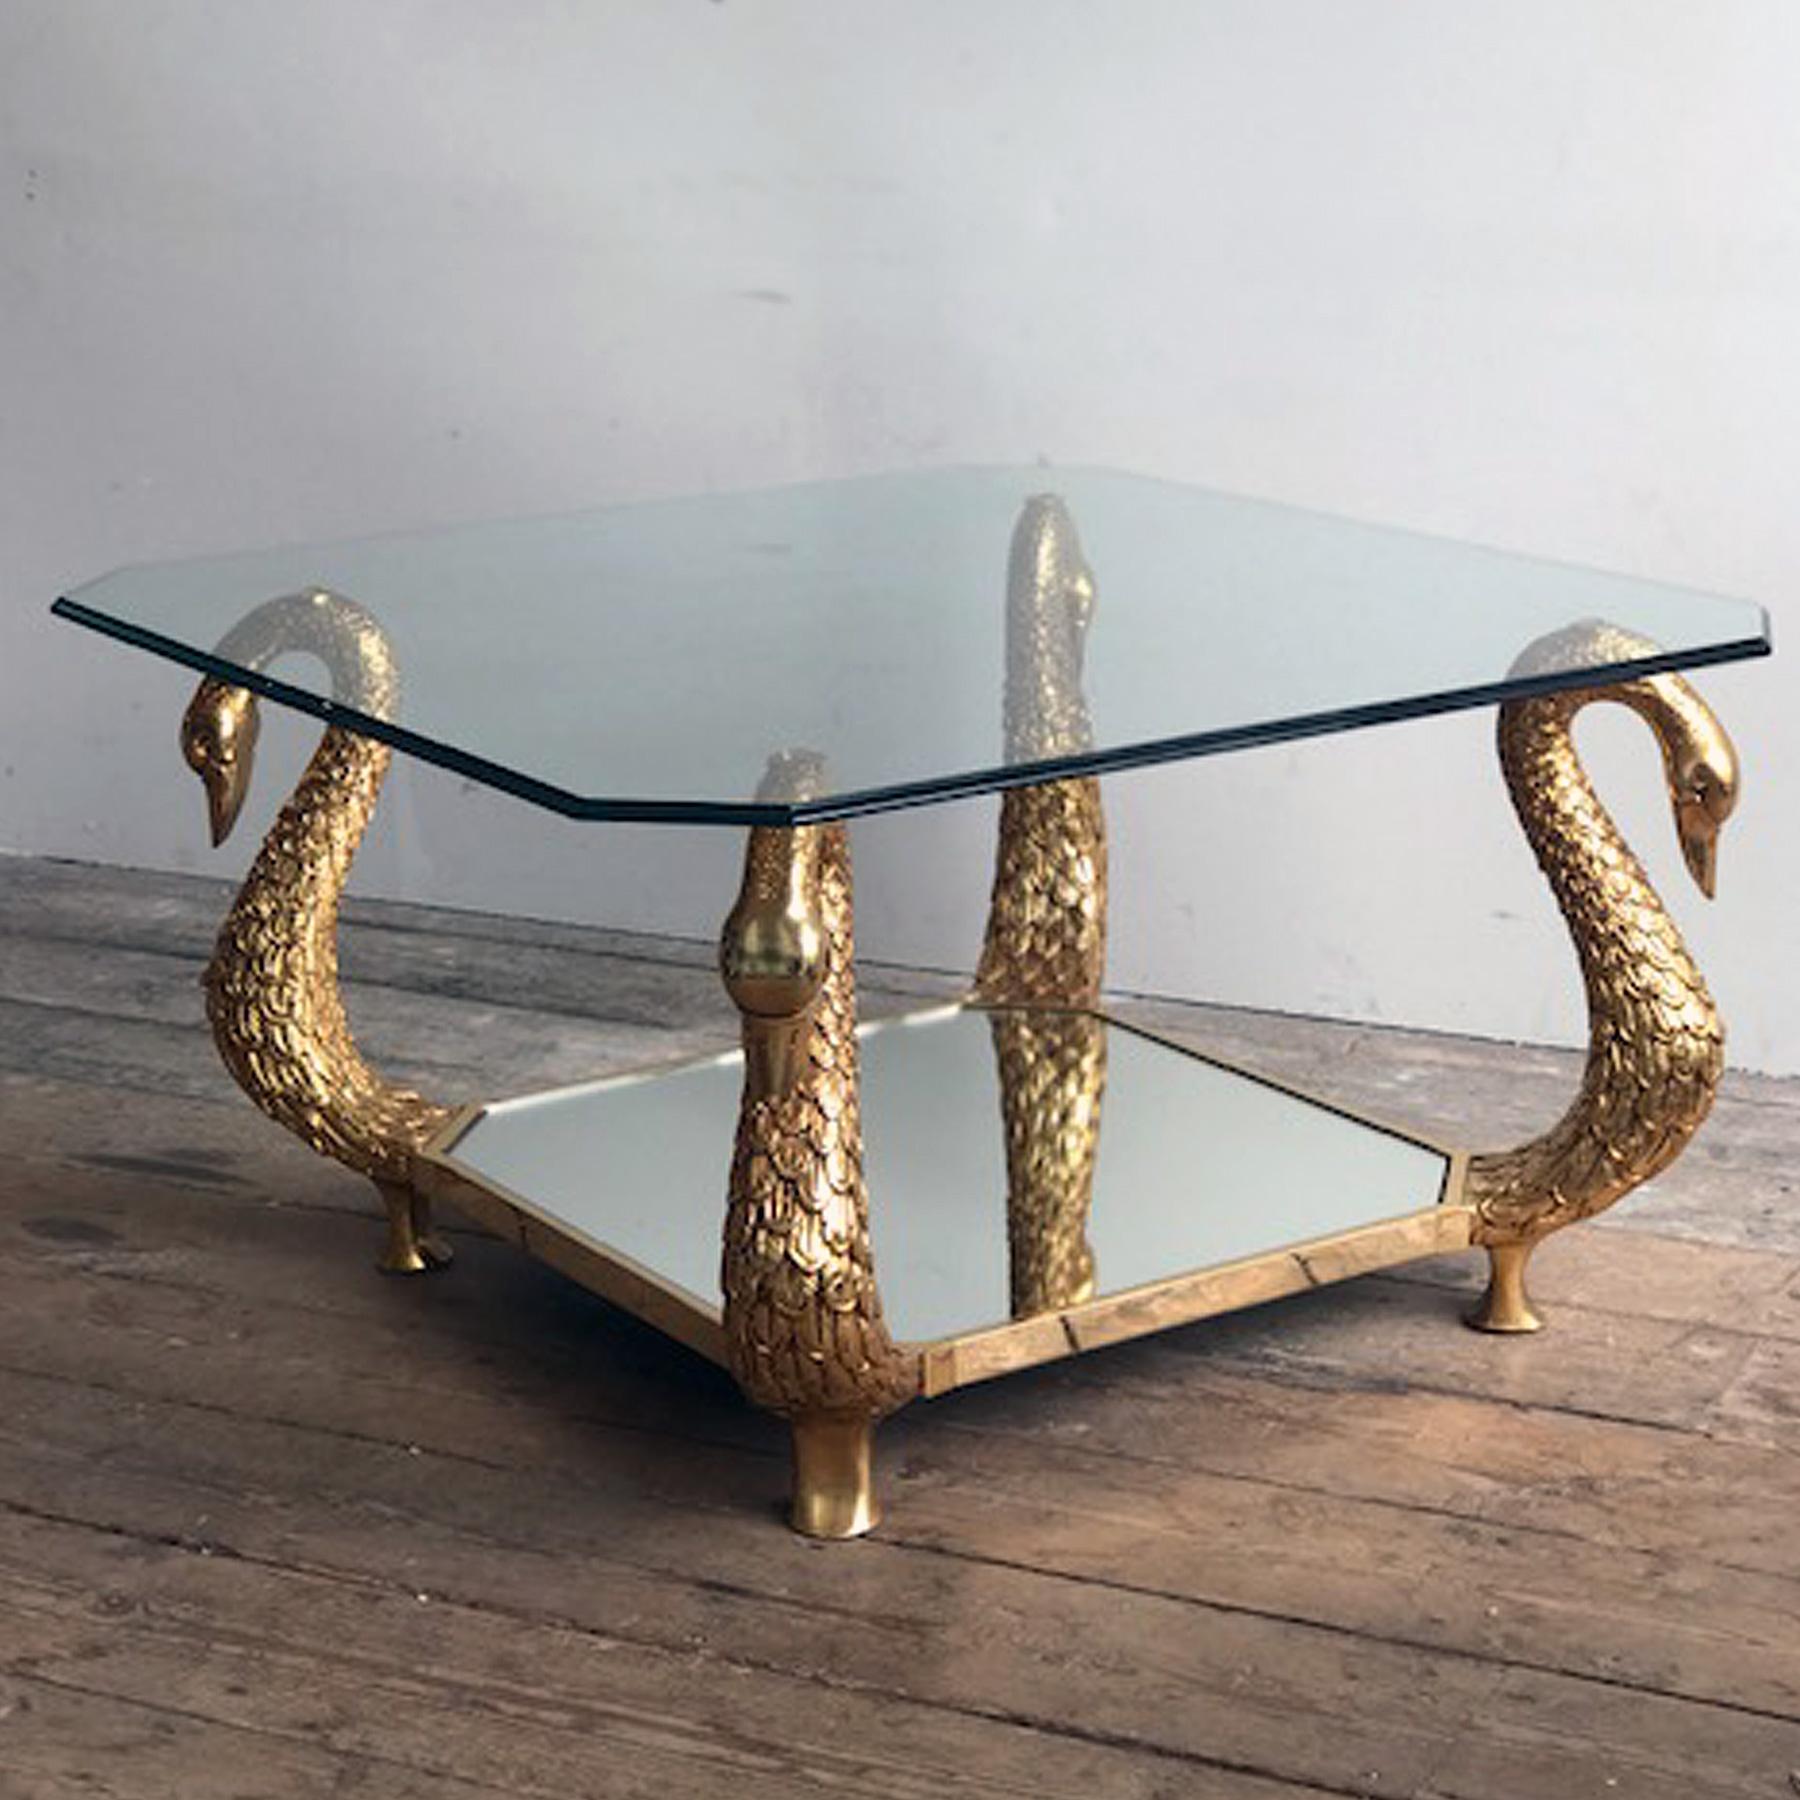 A very decorative 20th Century Coffee table / side table, x4 elaborite Swan necks holding a beveled glass plate and with a mirrored bottom.

Definiely a table which will fit an eclectic style with some Hollywood Regency Glam.